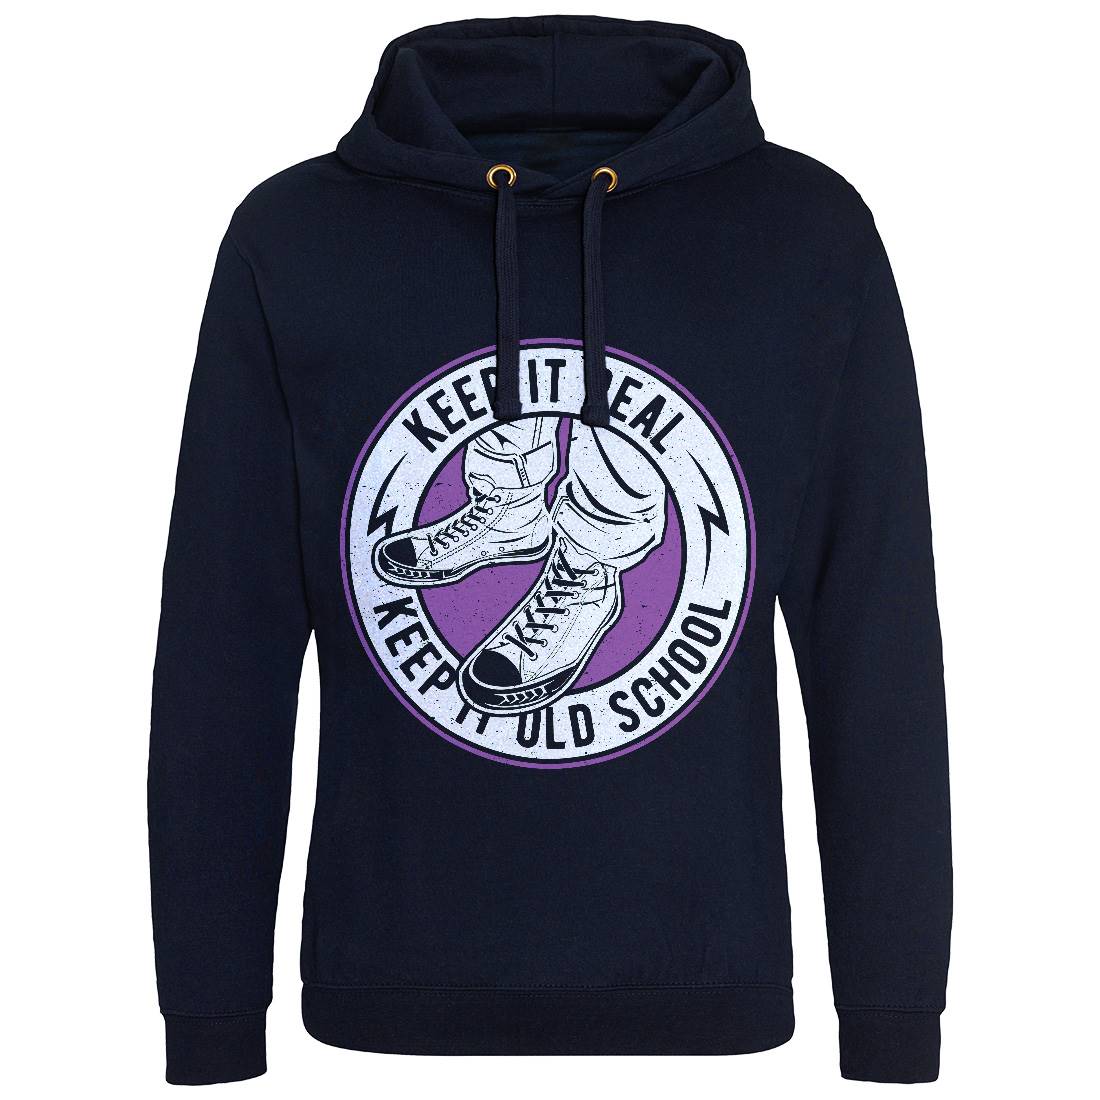 Keep It Old School Mens Hoodie Without Pocket Retro A074